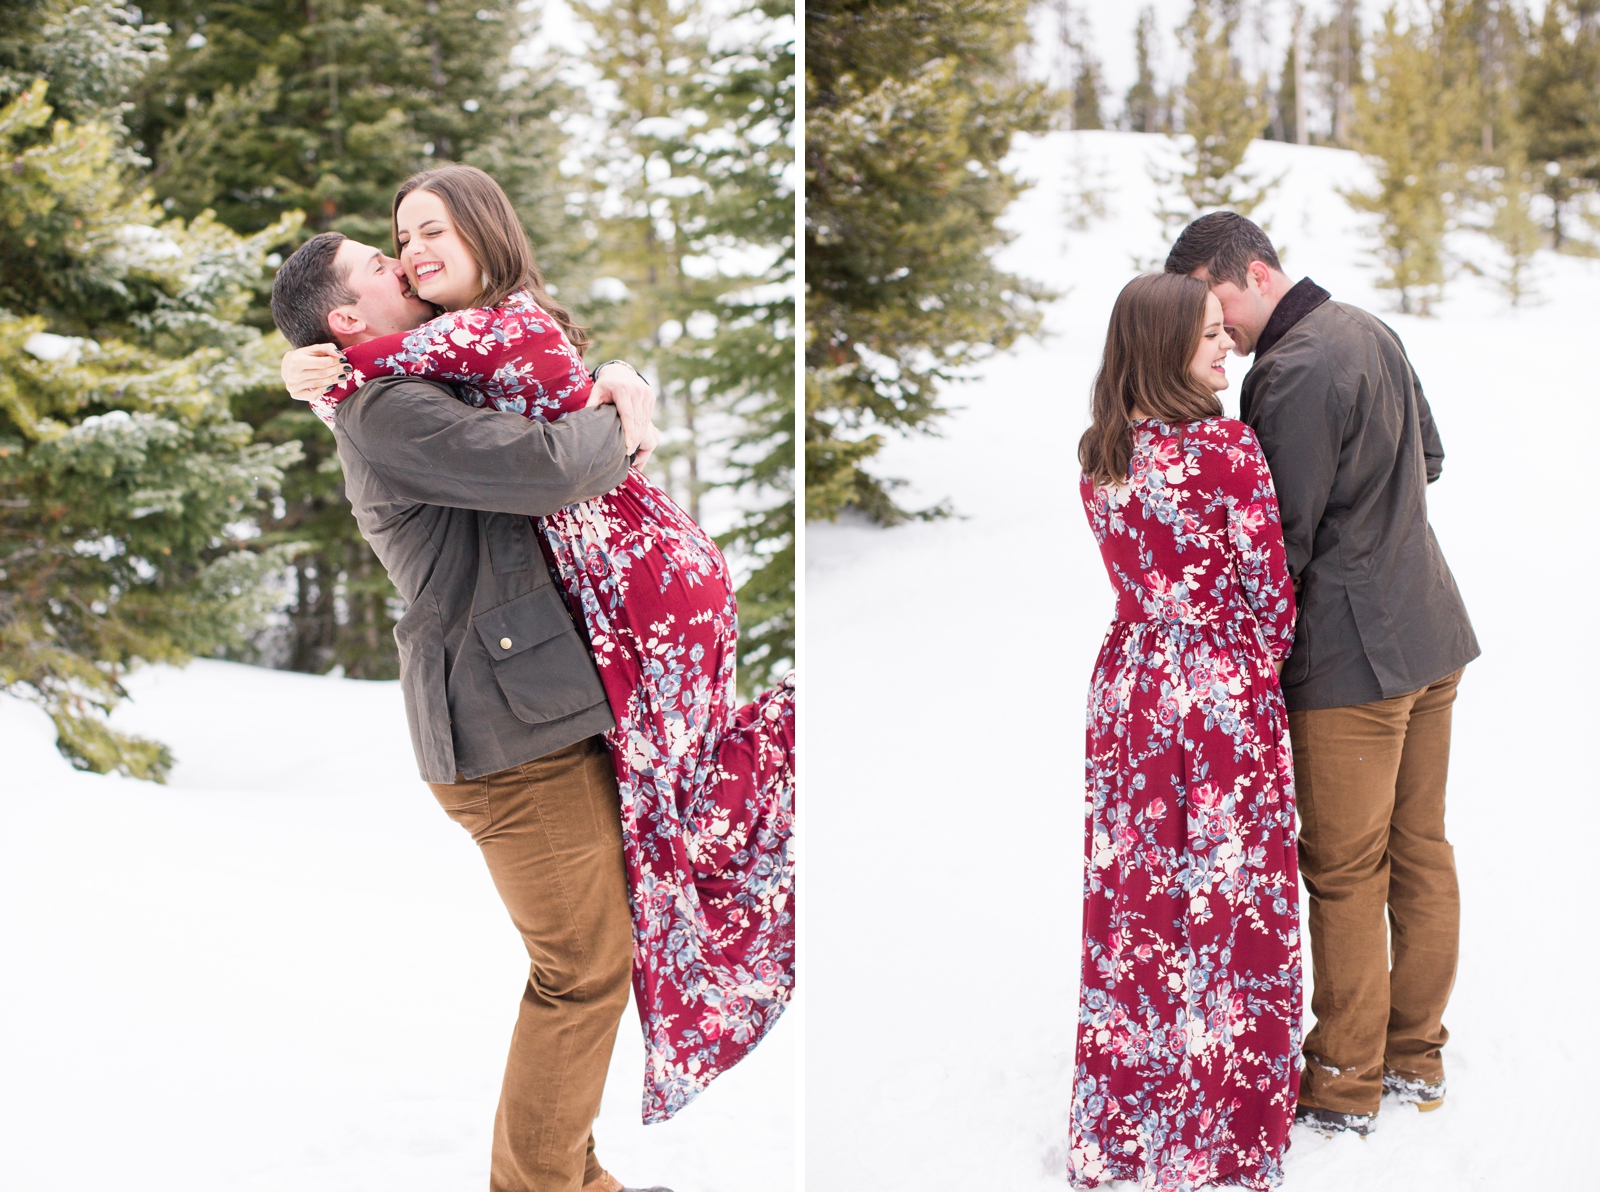 Our Engagement Session - Sydney Bruton Photography